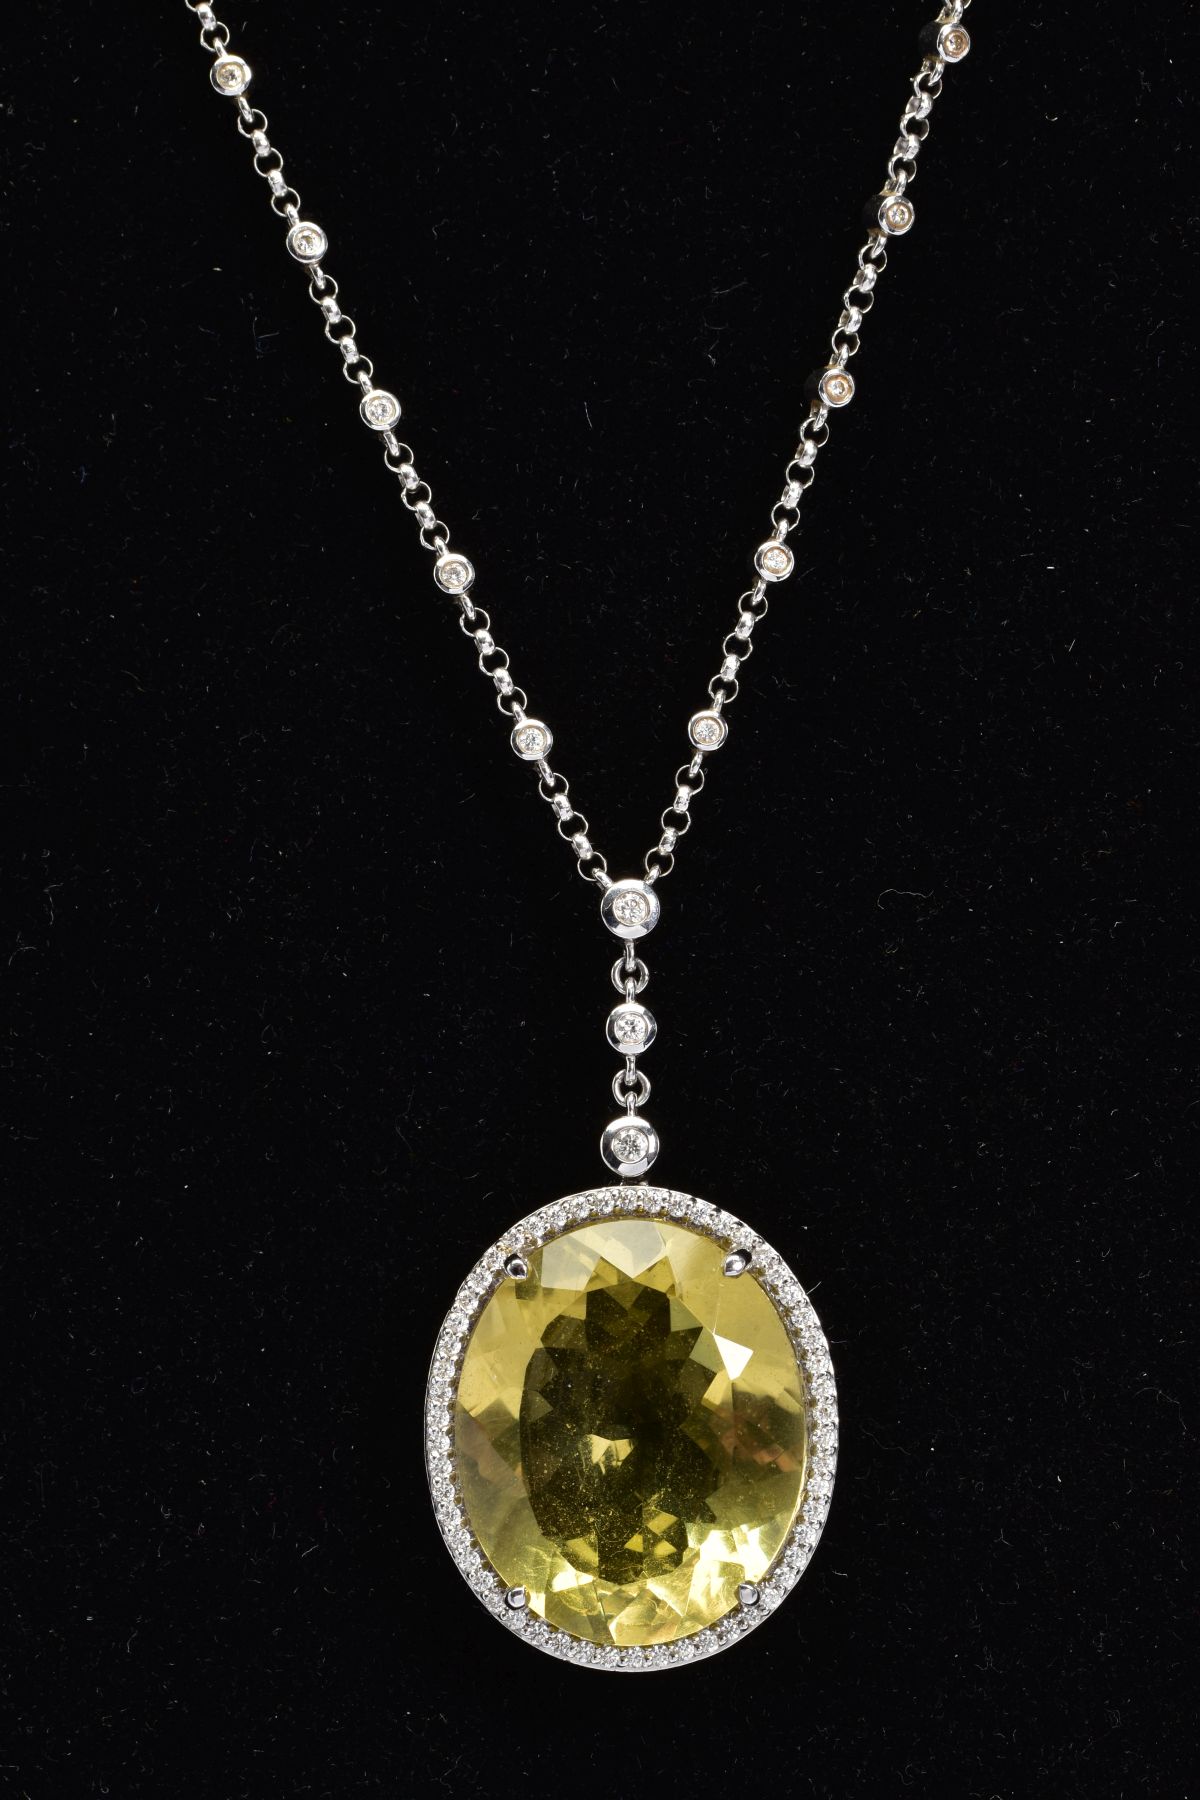 AN 18CT WHITE GOLD, CITRINE AND DIAMOND PENDANT AND MATCHING EARRINGS, the pendant designed as a - Image 3 of 5